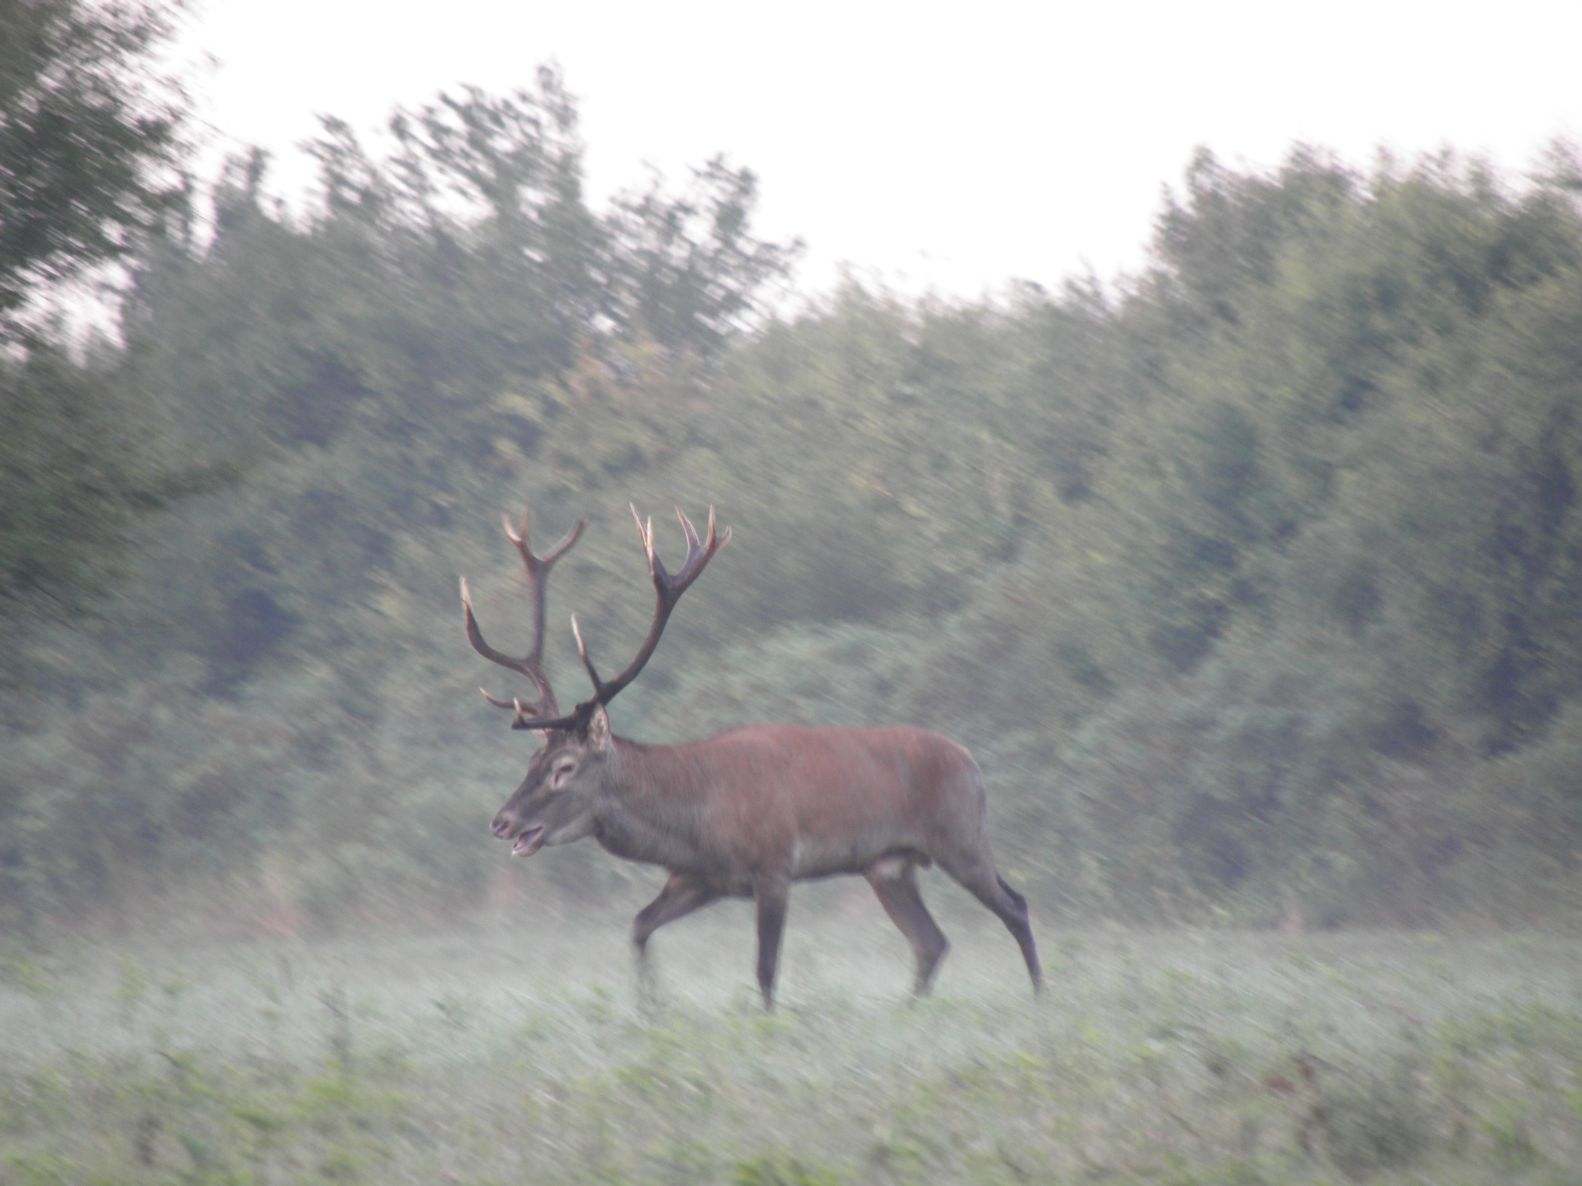 FOG IN THE AREA OF BARANJA – STAGS IN THE MIST